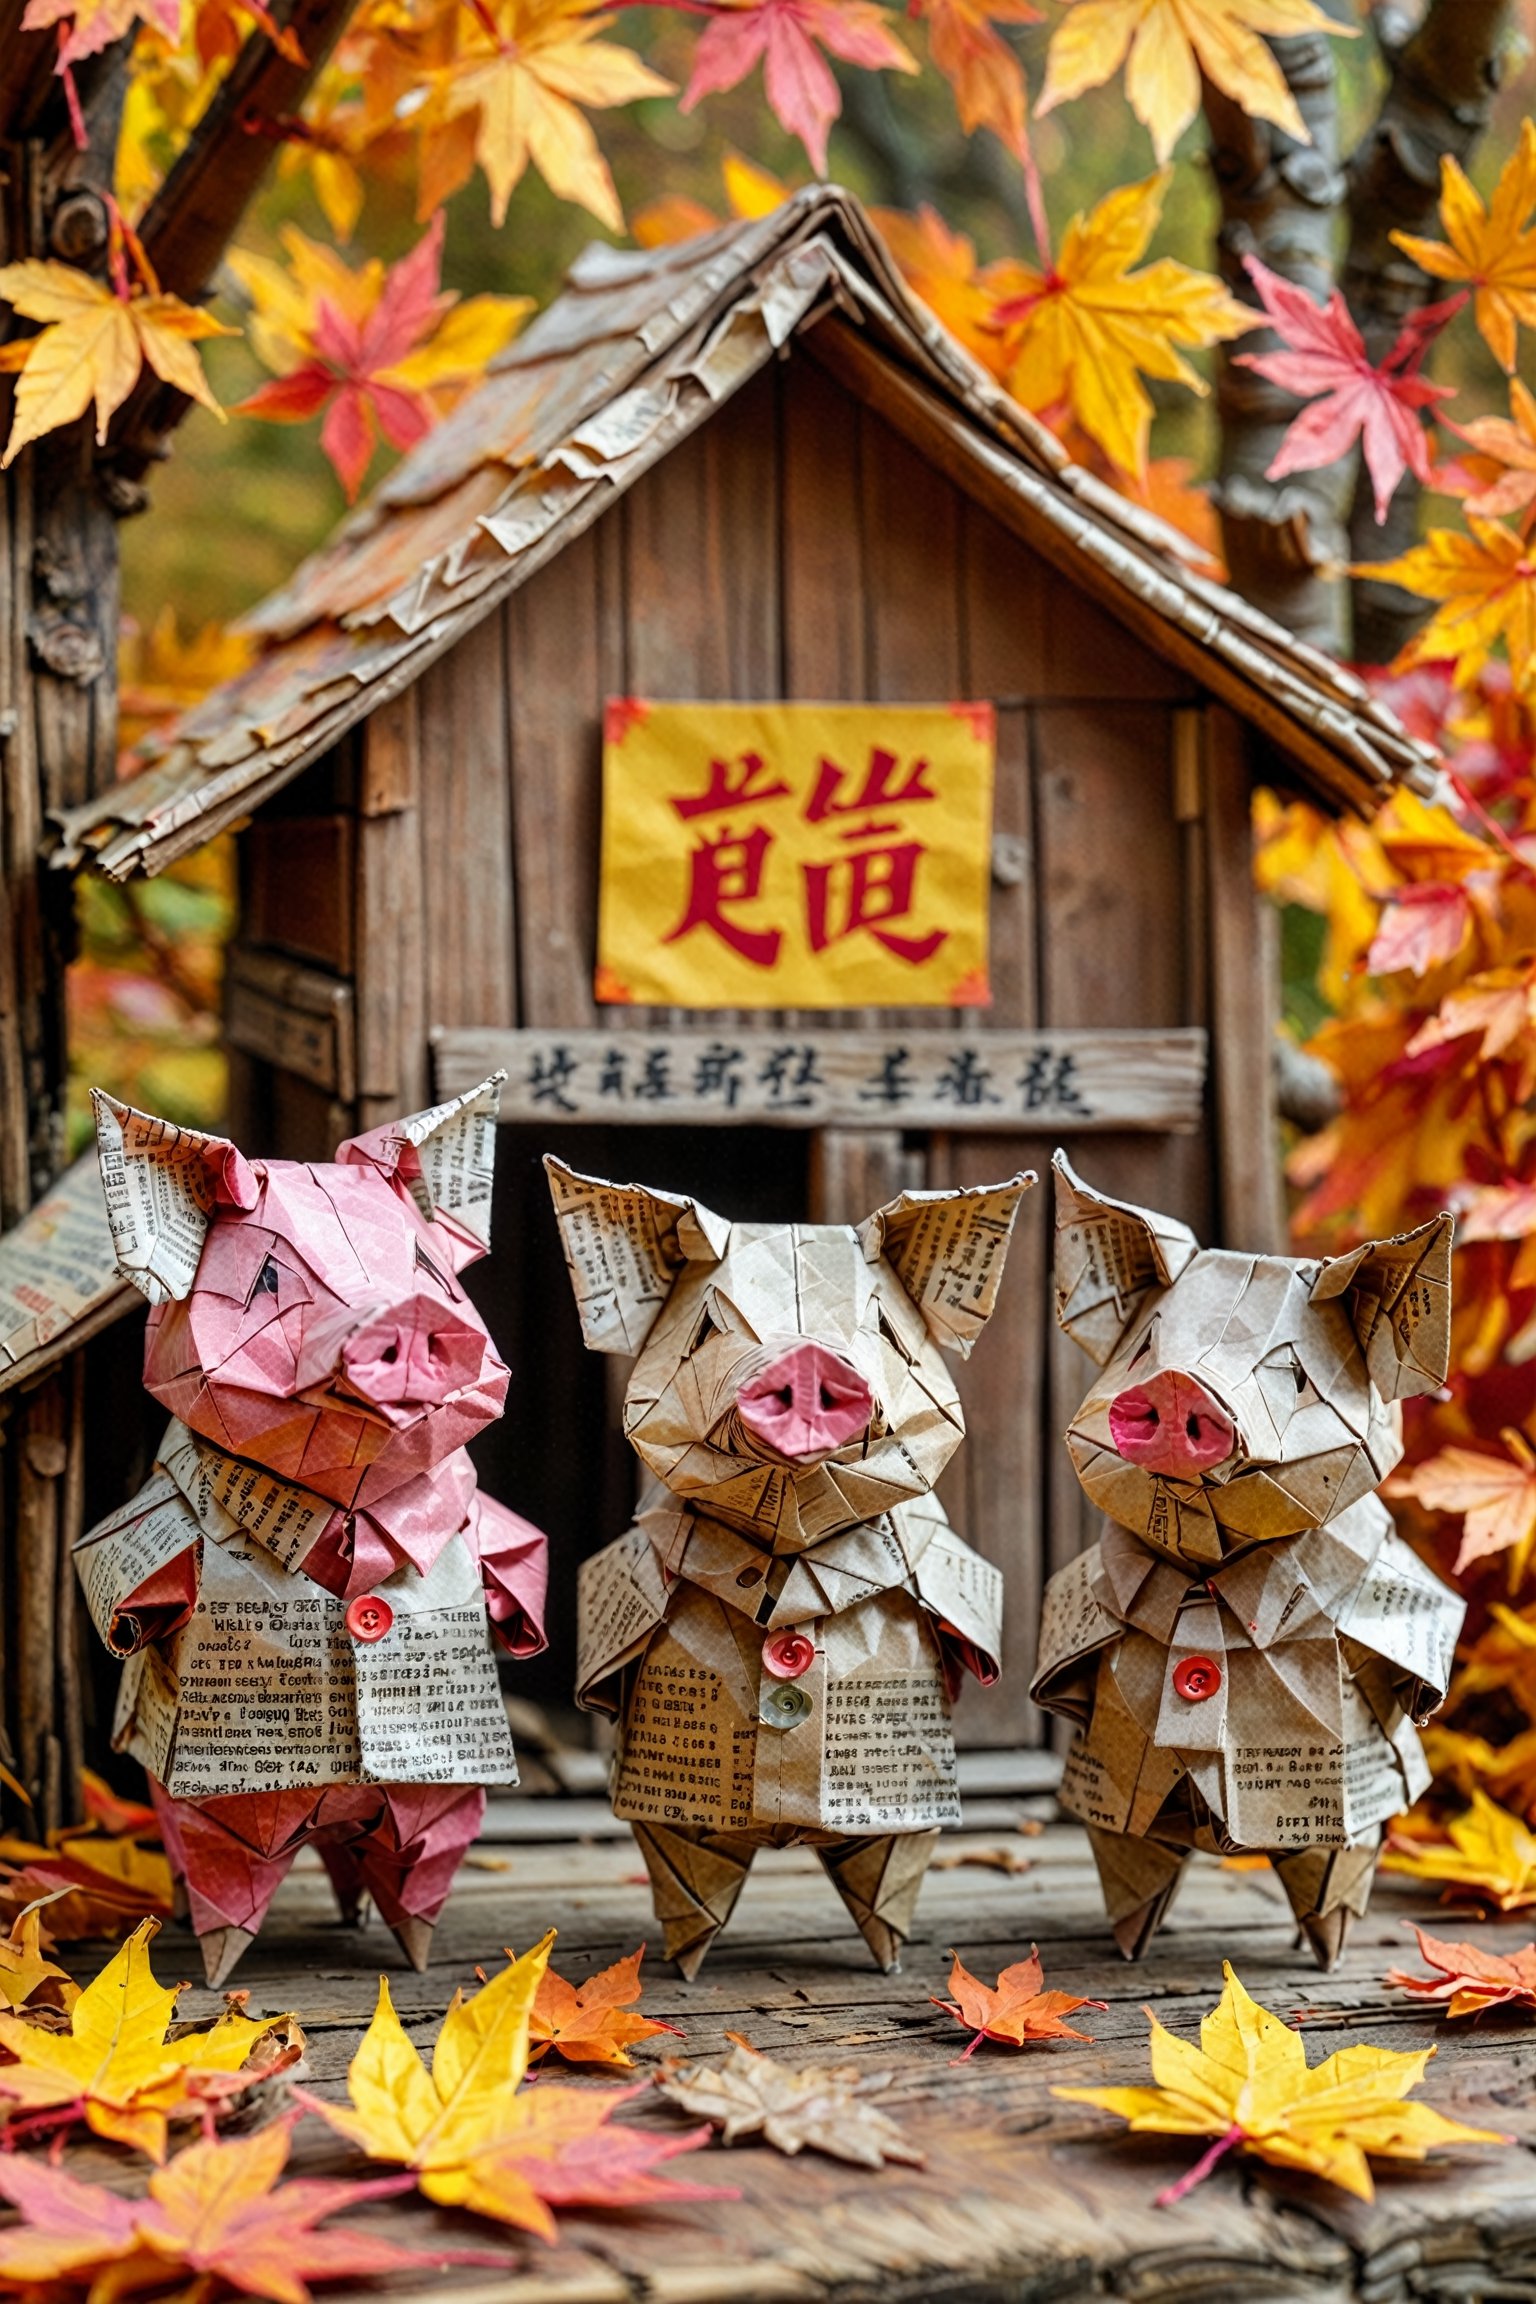 Three origami pig figures standing in front of a rustic wooden hut. The hut has a signboard with Chinese characters. The pigs are adorned with clothing made of newspaper pages, and their facial features include buttons and painted pink noses. The background is decorated with autumn leaves in hues of orange and yellow, suggesting a fall setting.